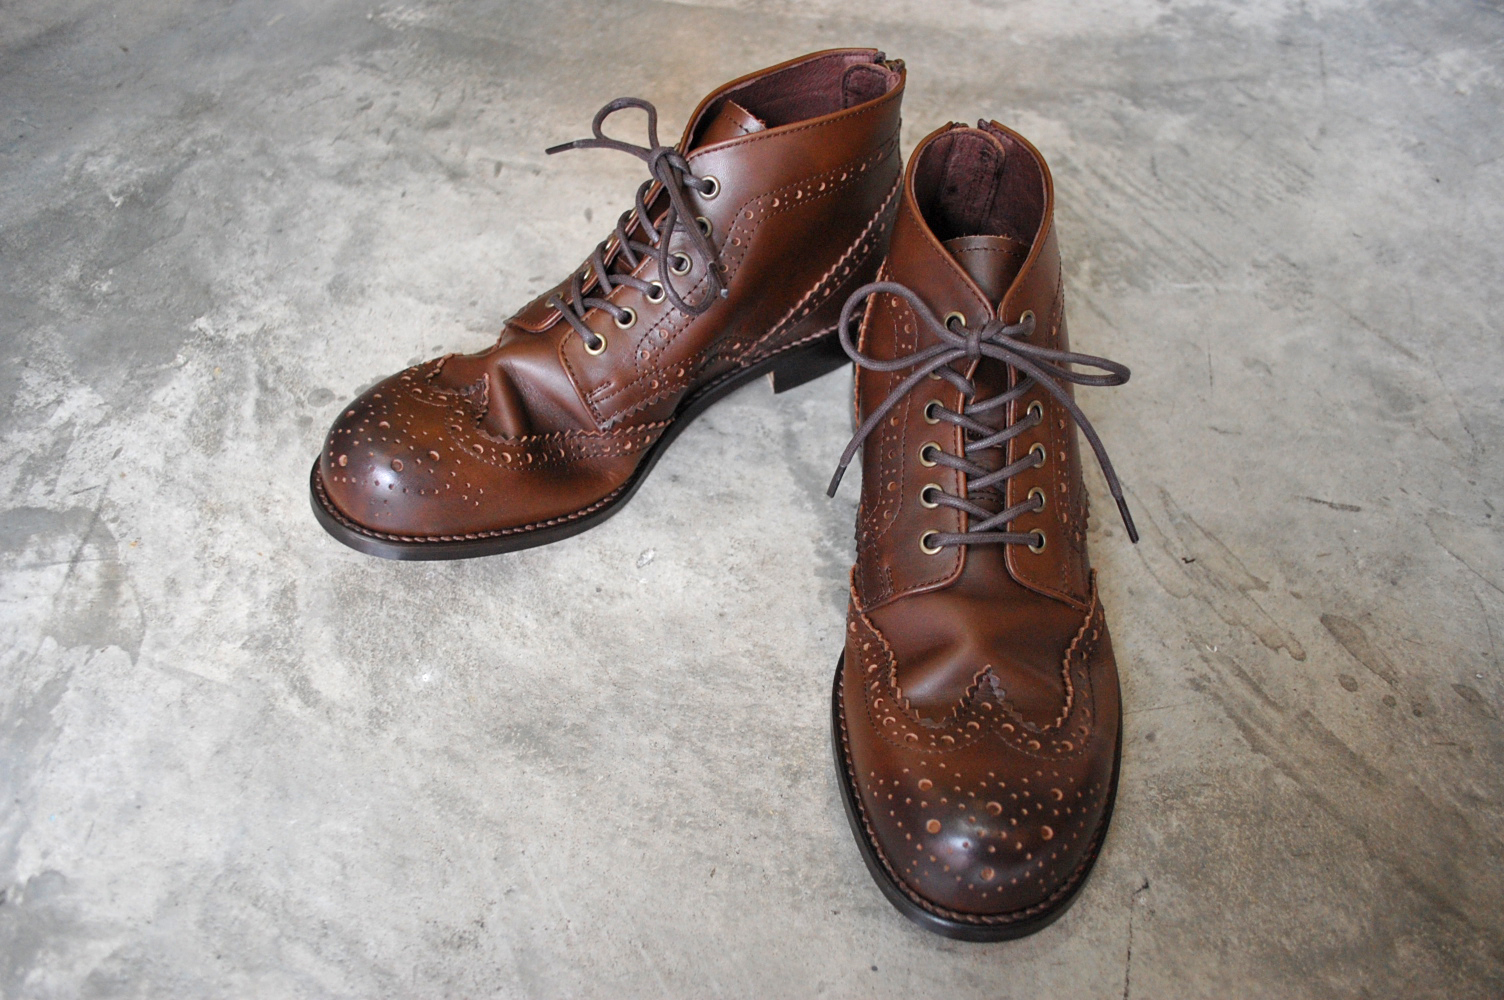 PADRONE パドローネ PU8054-1138-19C WING TIP BOOTS with BACK ZIP 